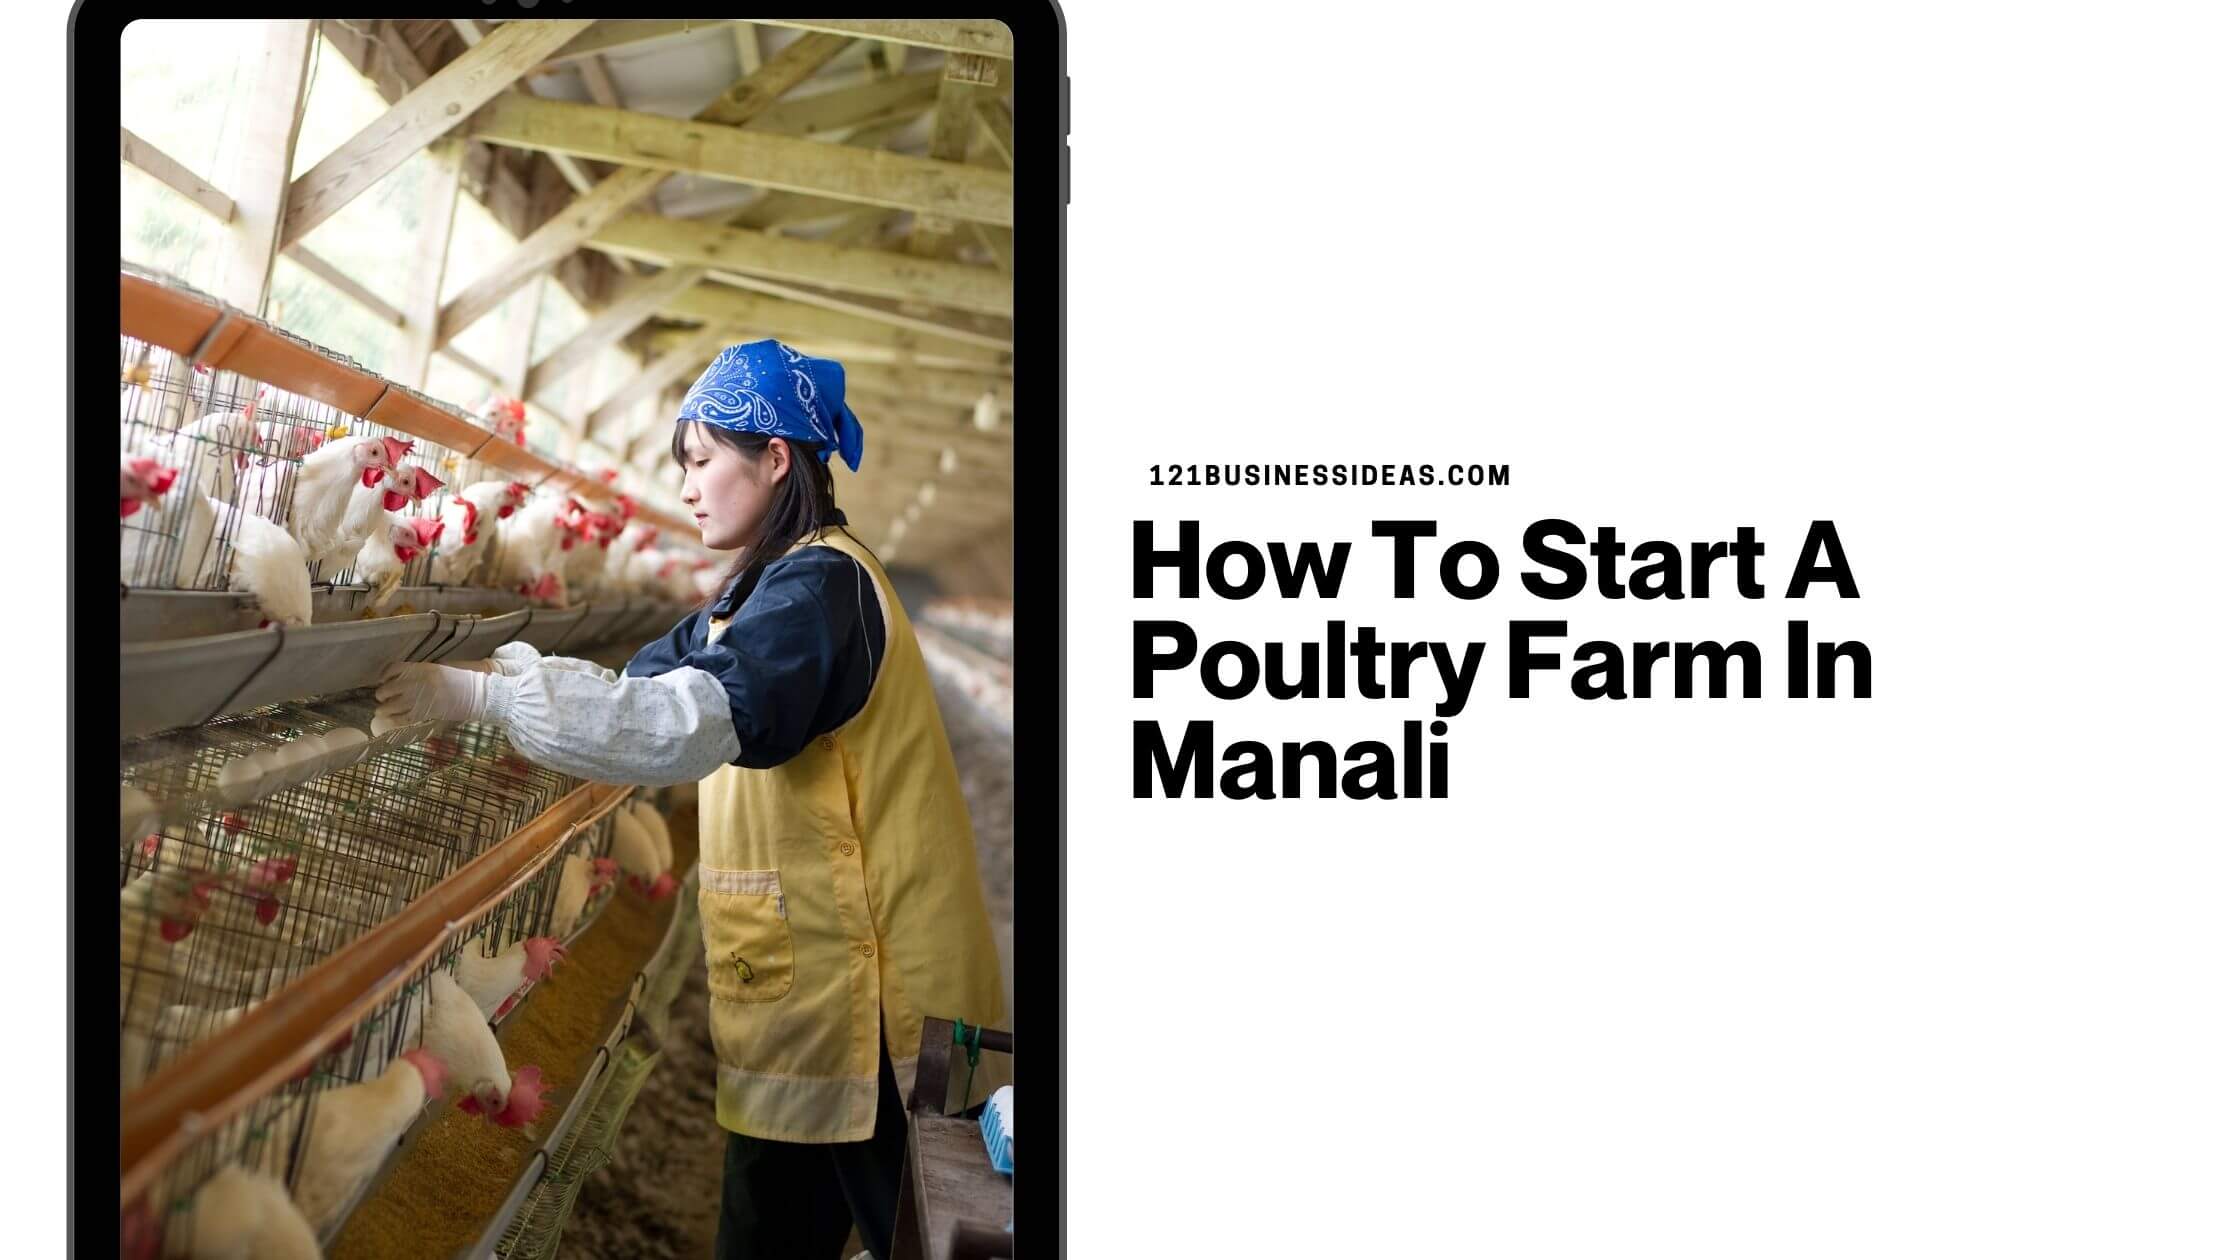 How To Start A Poultry Farm In Manali (1)